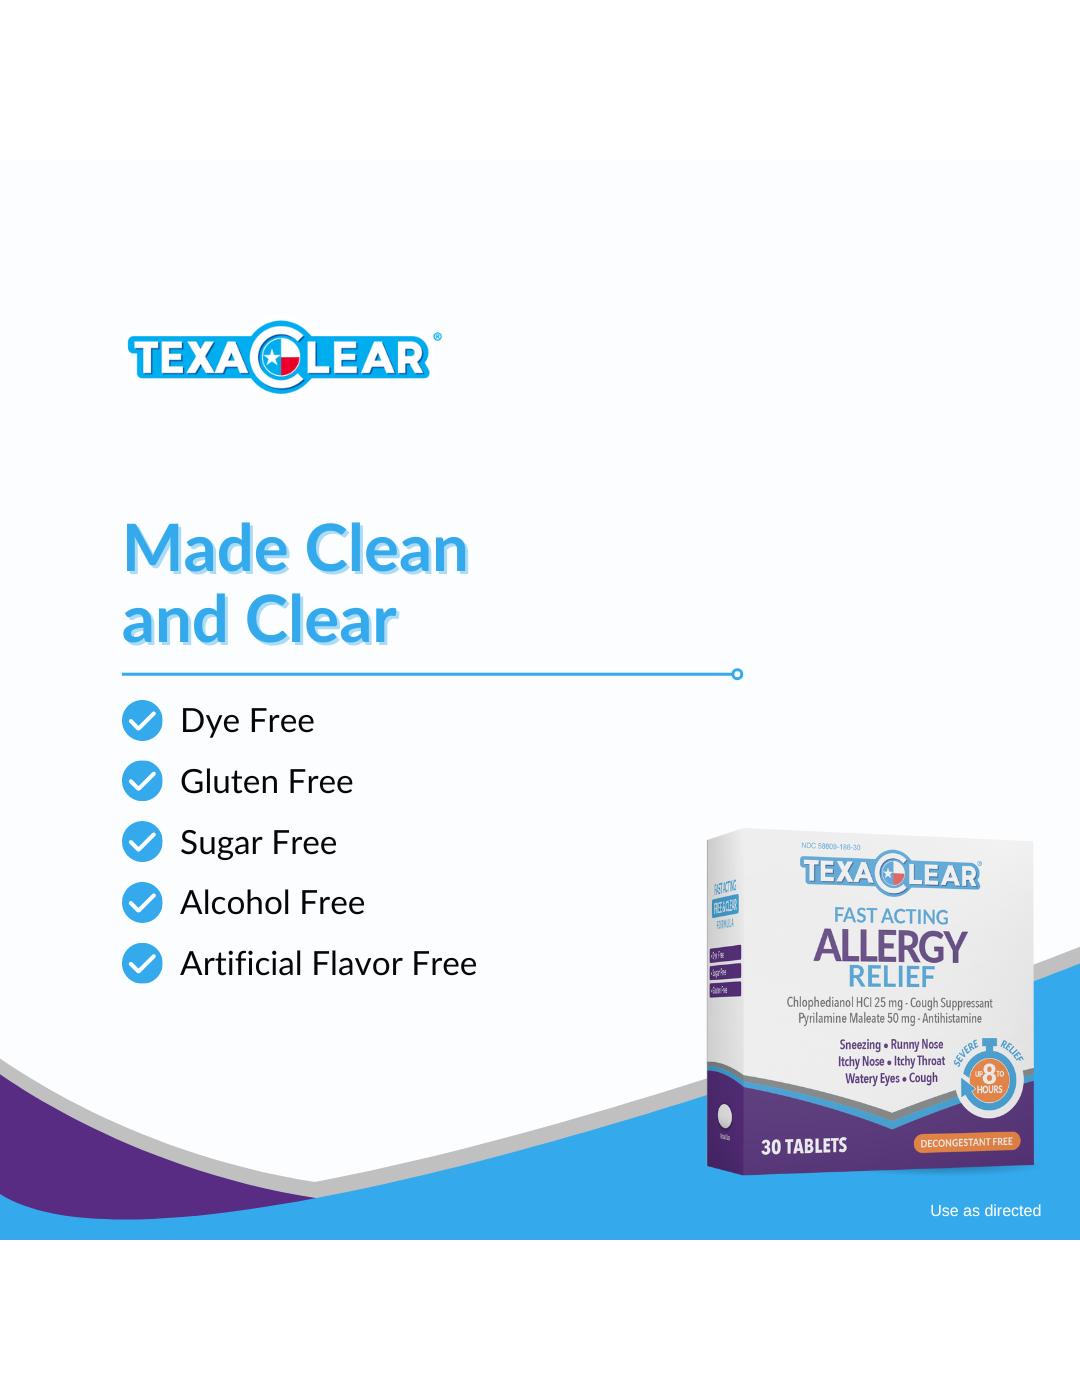 TexaClear Allergy Relief Tablets; image 6 of 6